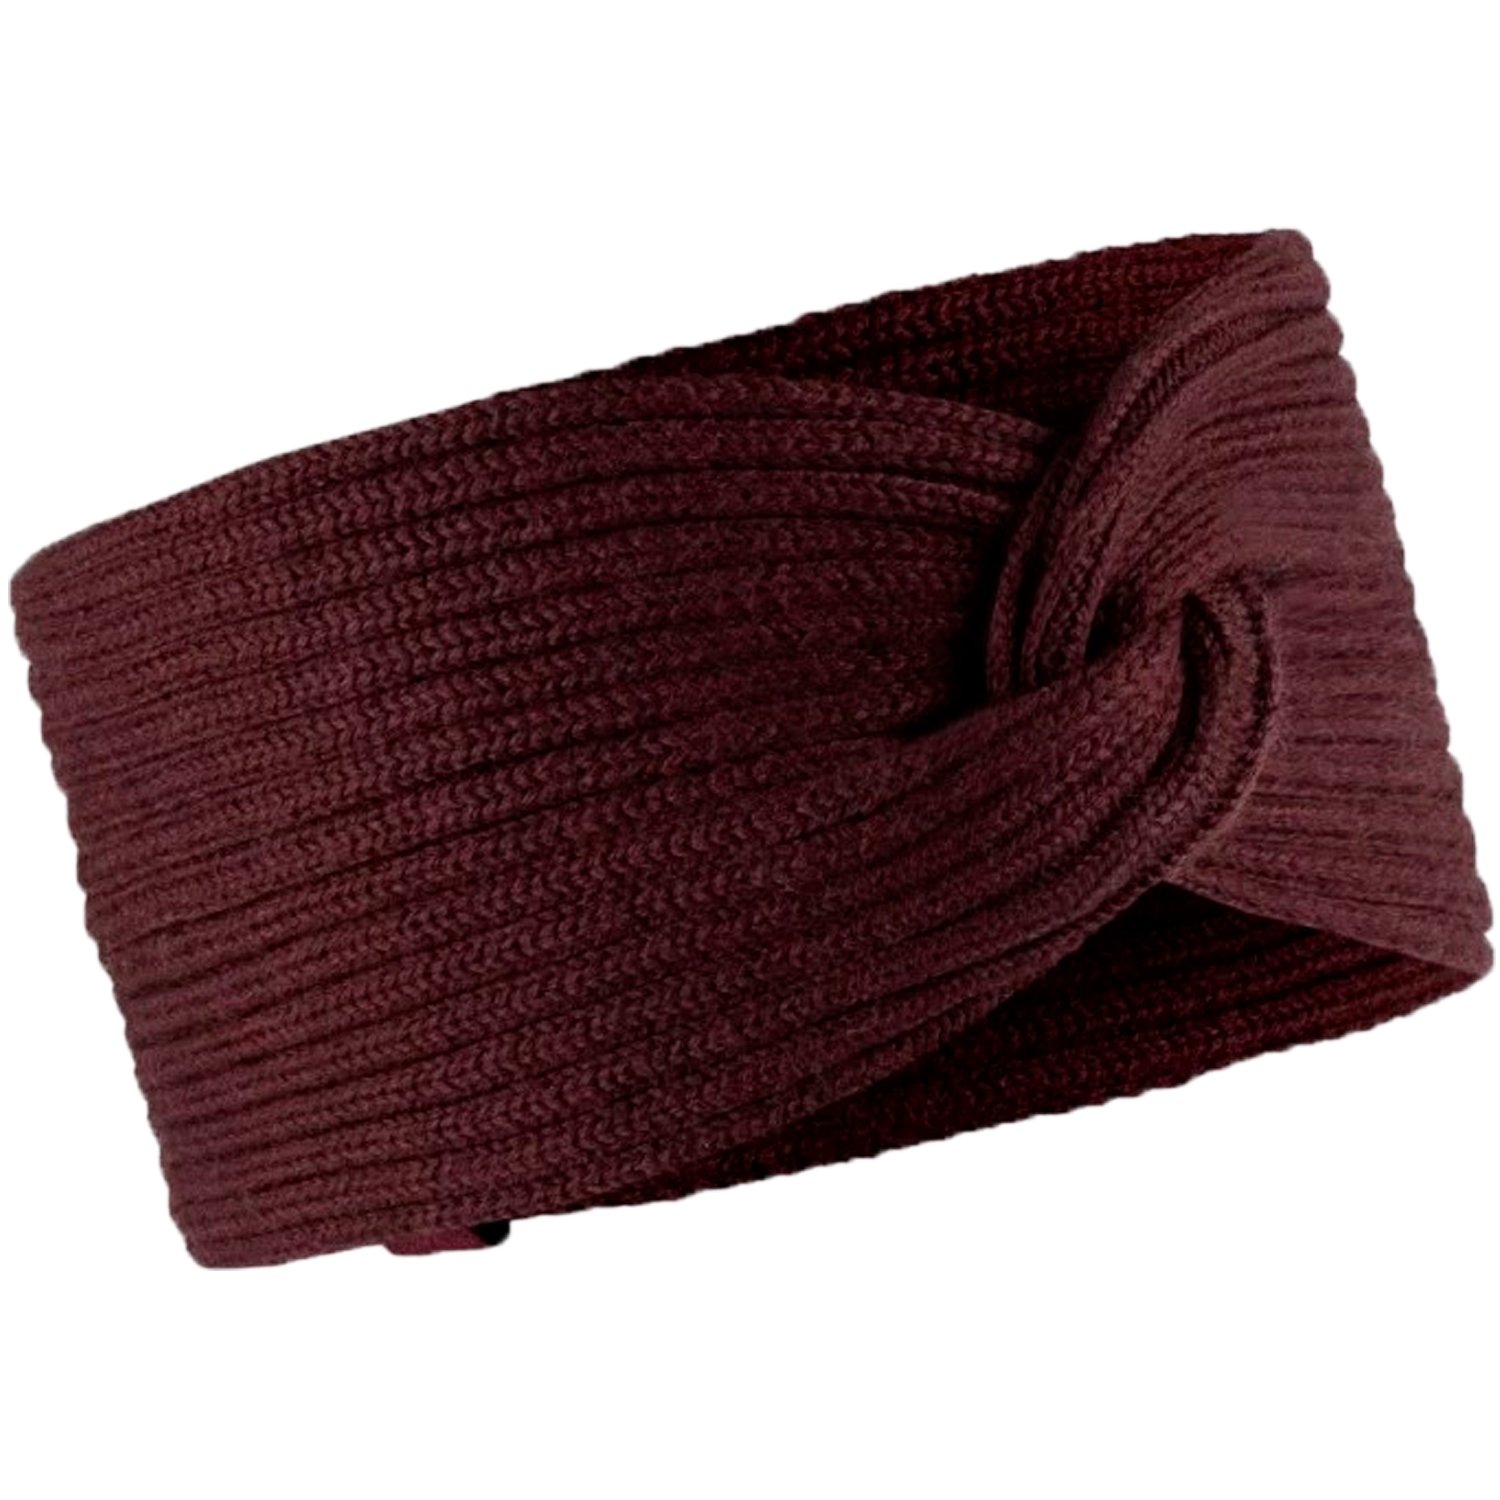 Повязка Buff Knitted Headband Norval Maroon, женский, 126459.632.10.00 шапка buff knitted hat norval pansy us one size 124242 601 10 00